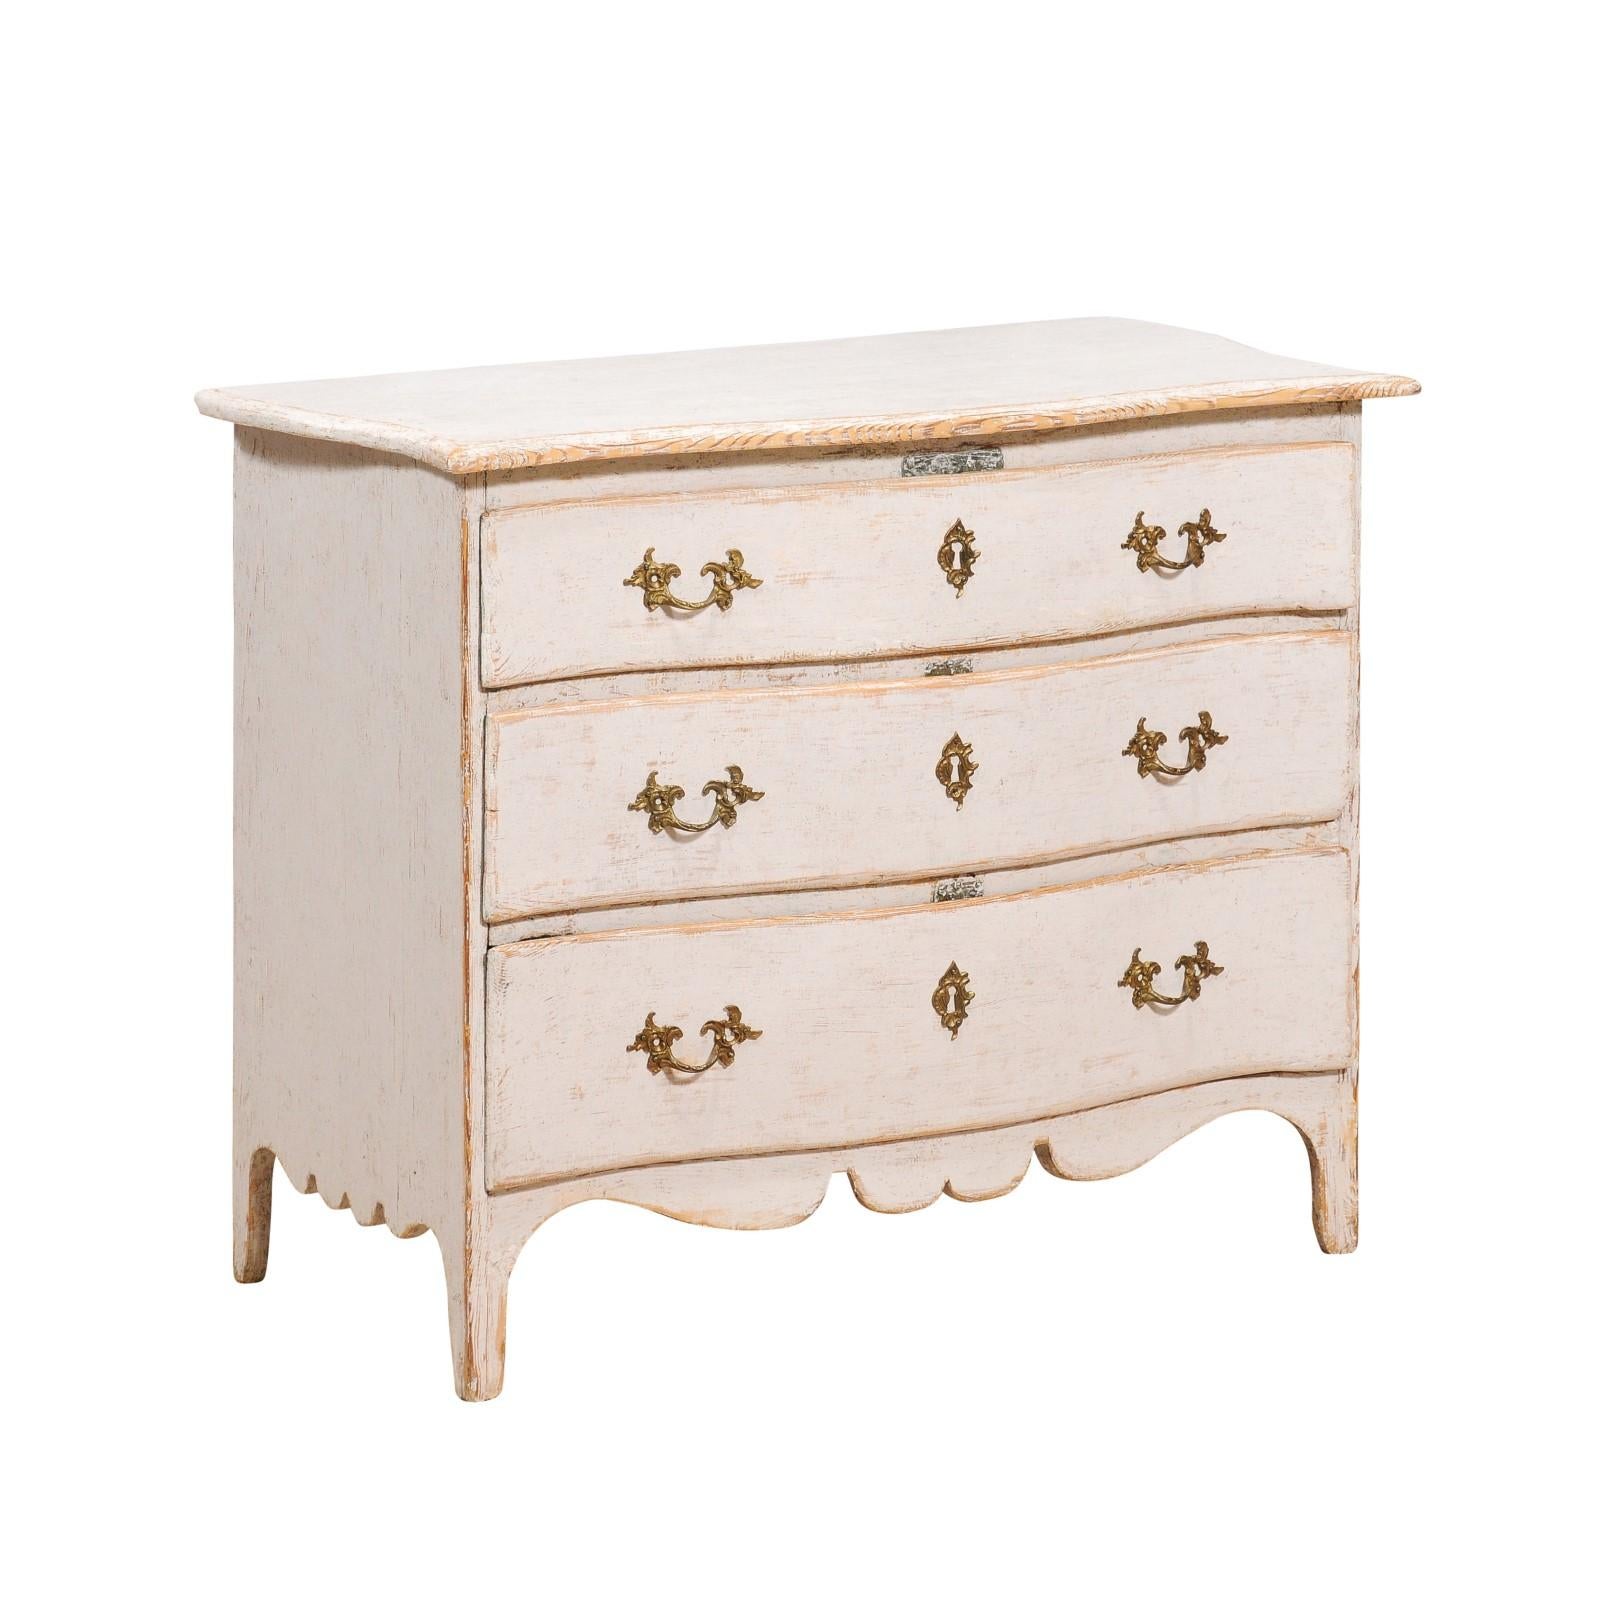 A Swedish Rococo period three-drawer commode from circa 1770 with light gray cream painted finish, carved skirt and serpentine front. This Swedish Rococo period three-drawer commode, dating back to circa 1770, is a magnificent example of the opulent